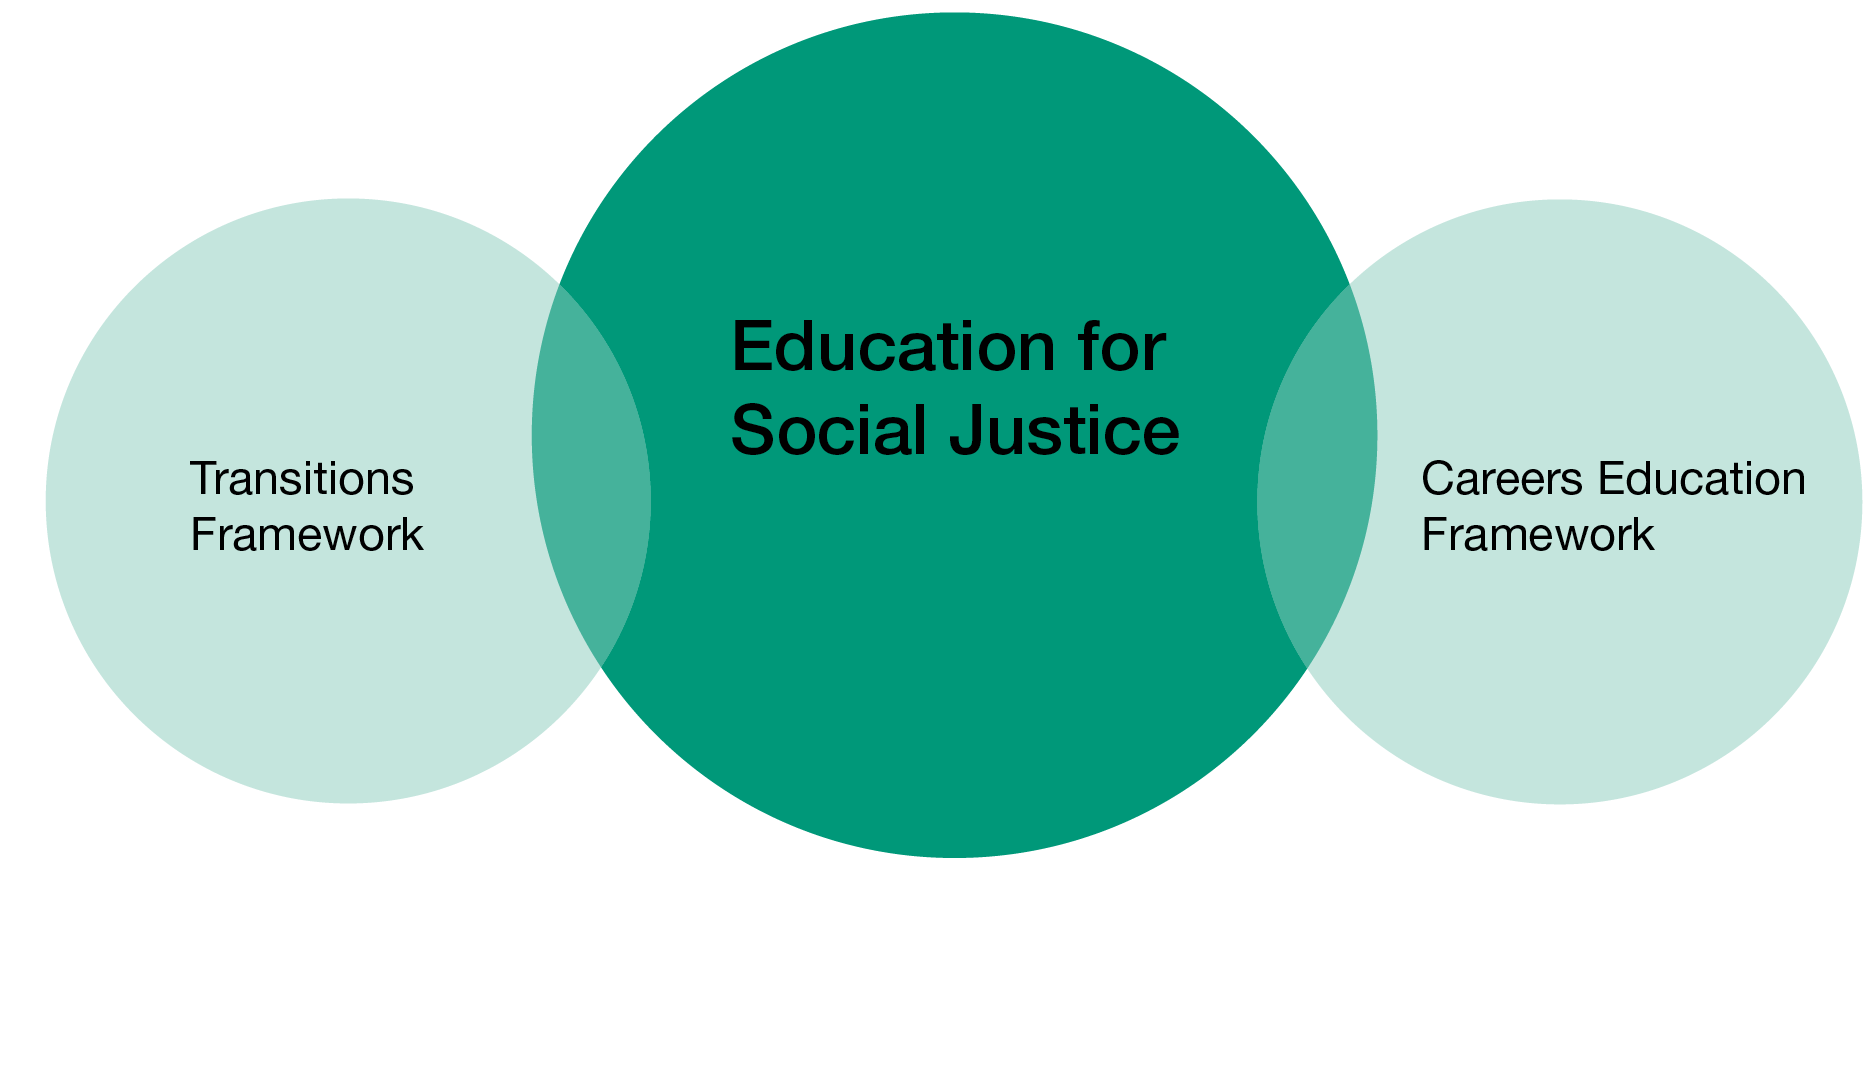 Education for Social Justice touching Transitions Framework and Careers Education Framework circles.